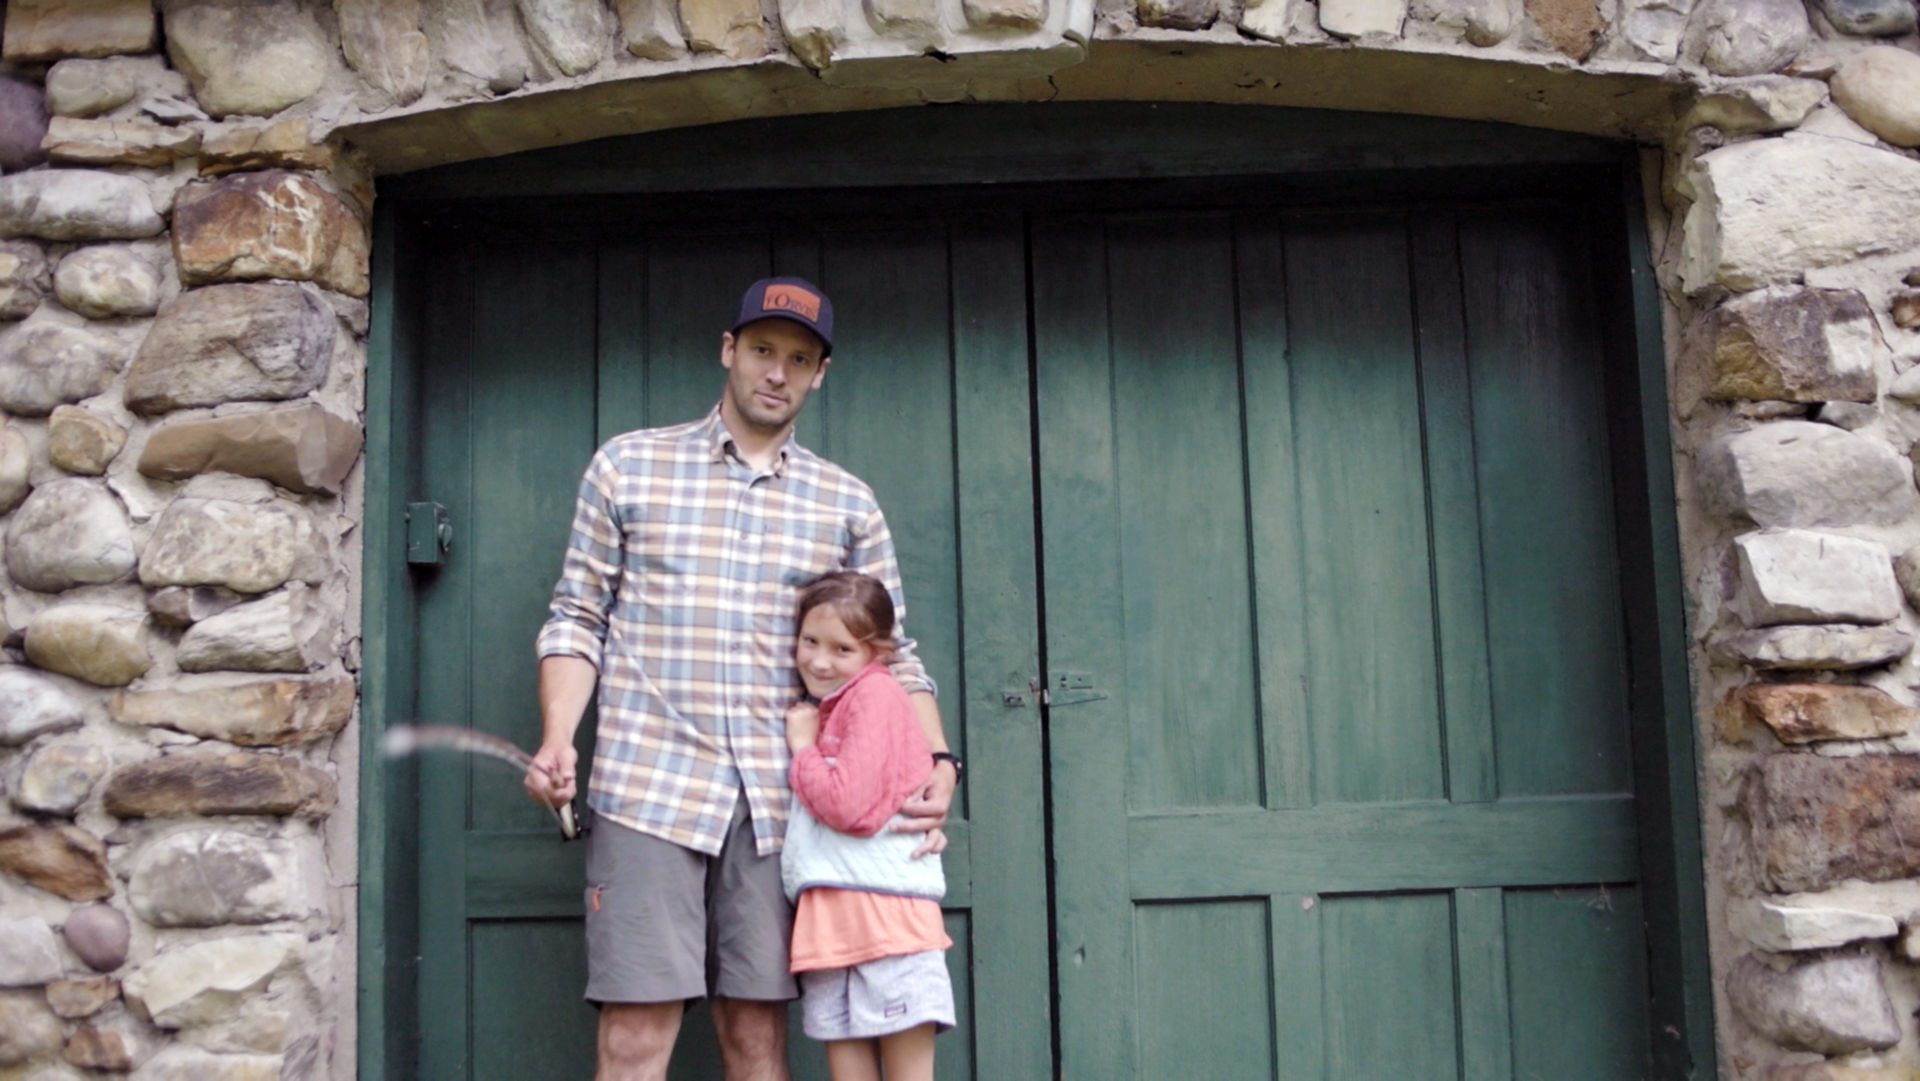 Simon Perkins and his small daughter coy up for the photographer in front of green double doors in a rough stone building